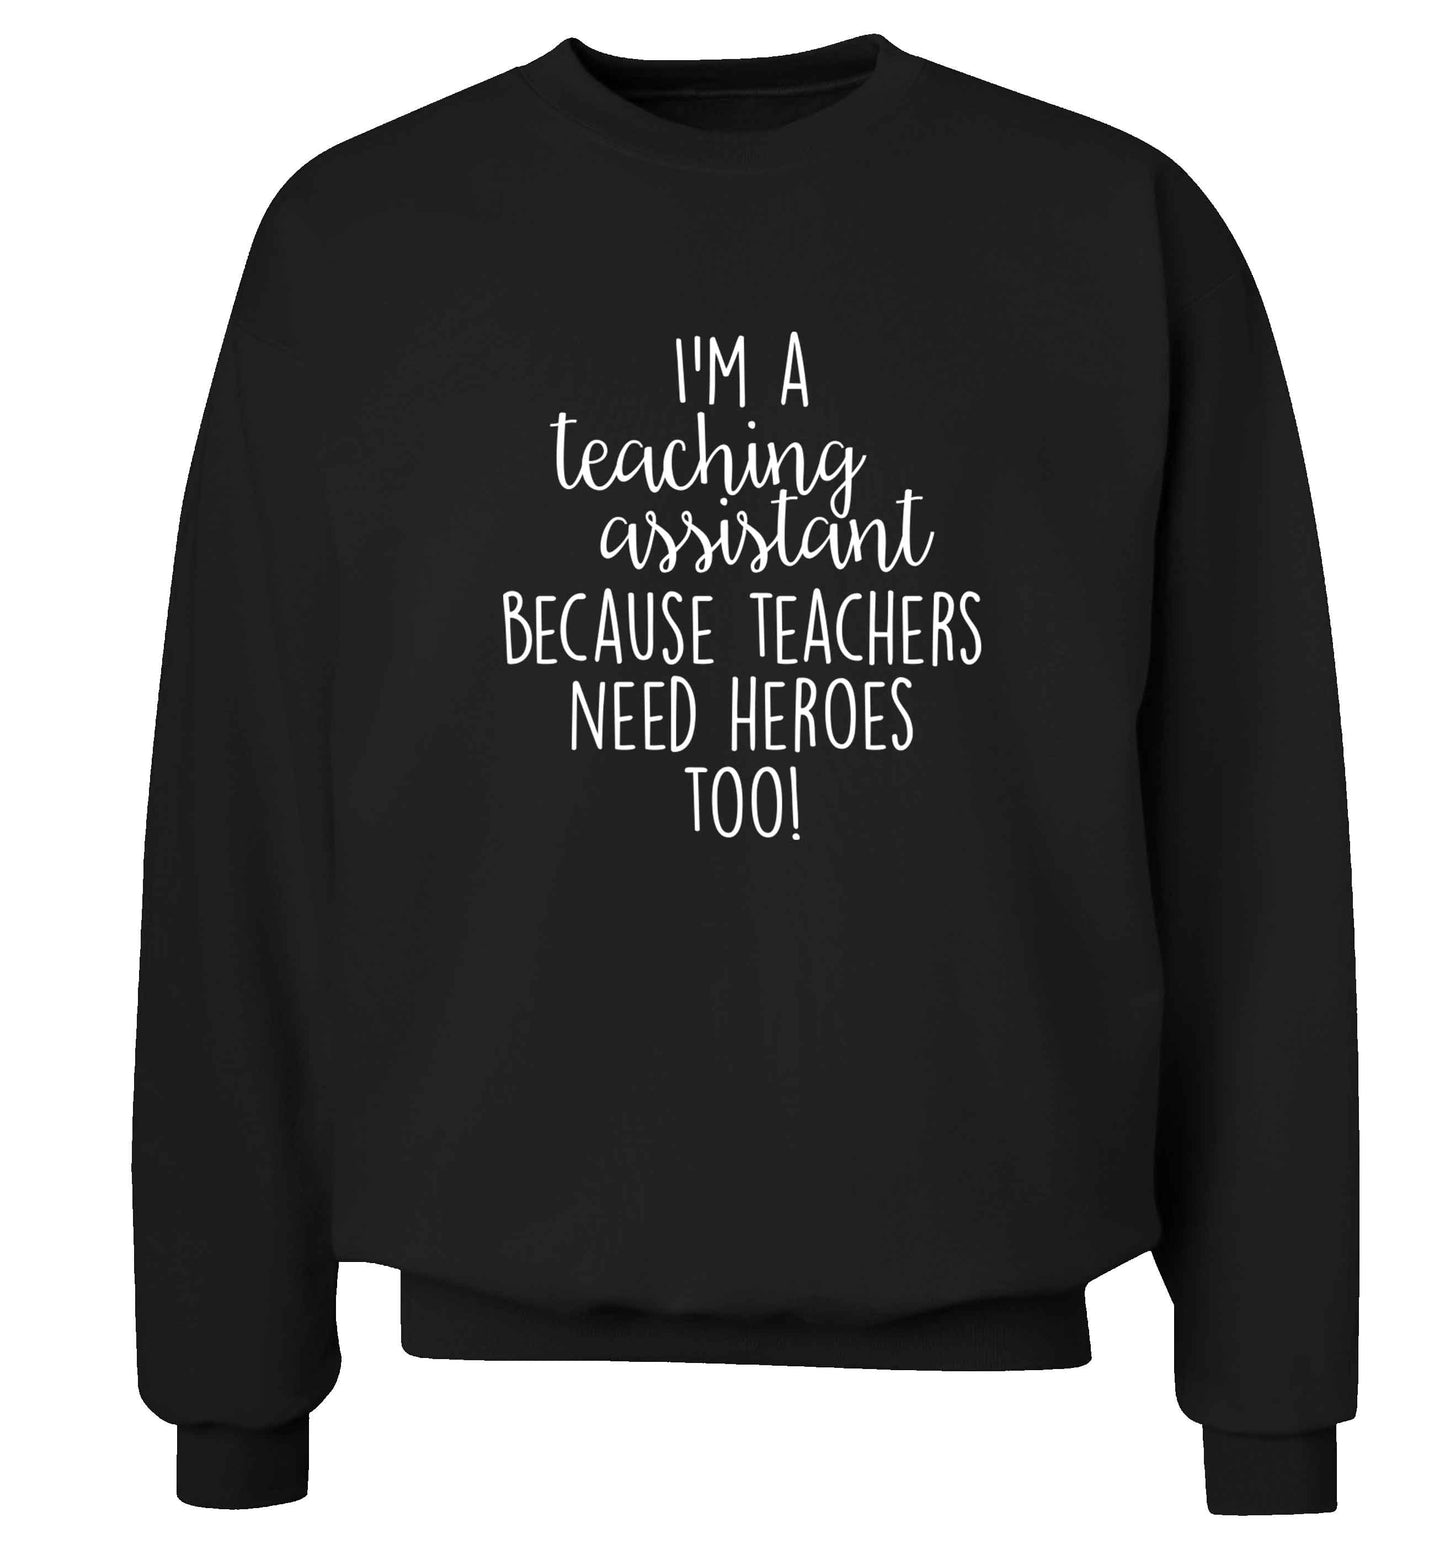 I'm a teaching assistant because teachers need heroes too! adult's unisex black sweater 2XL